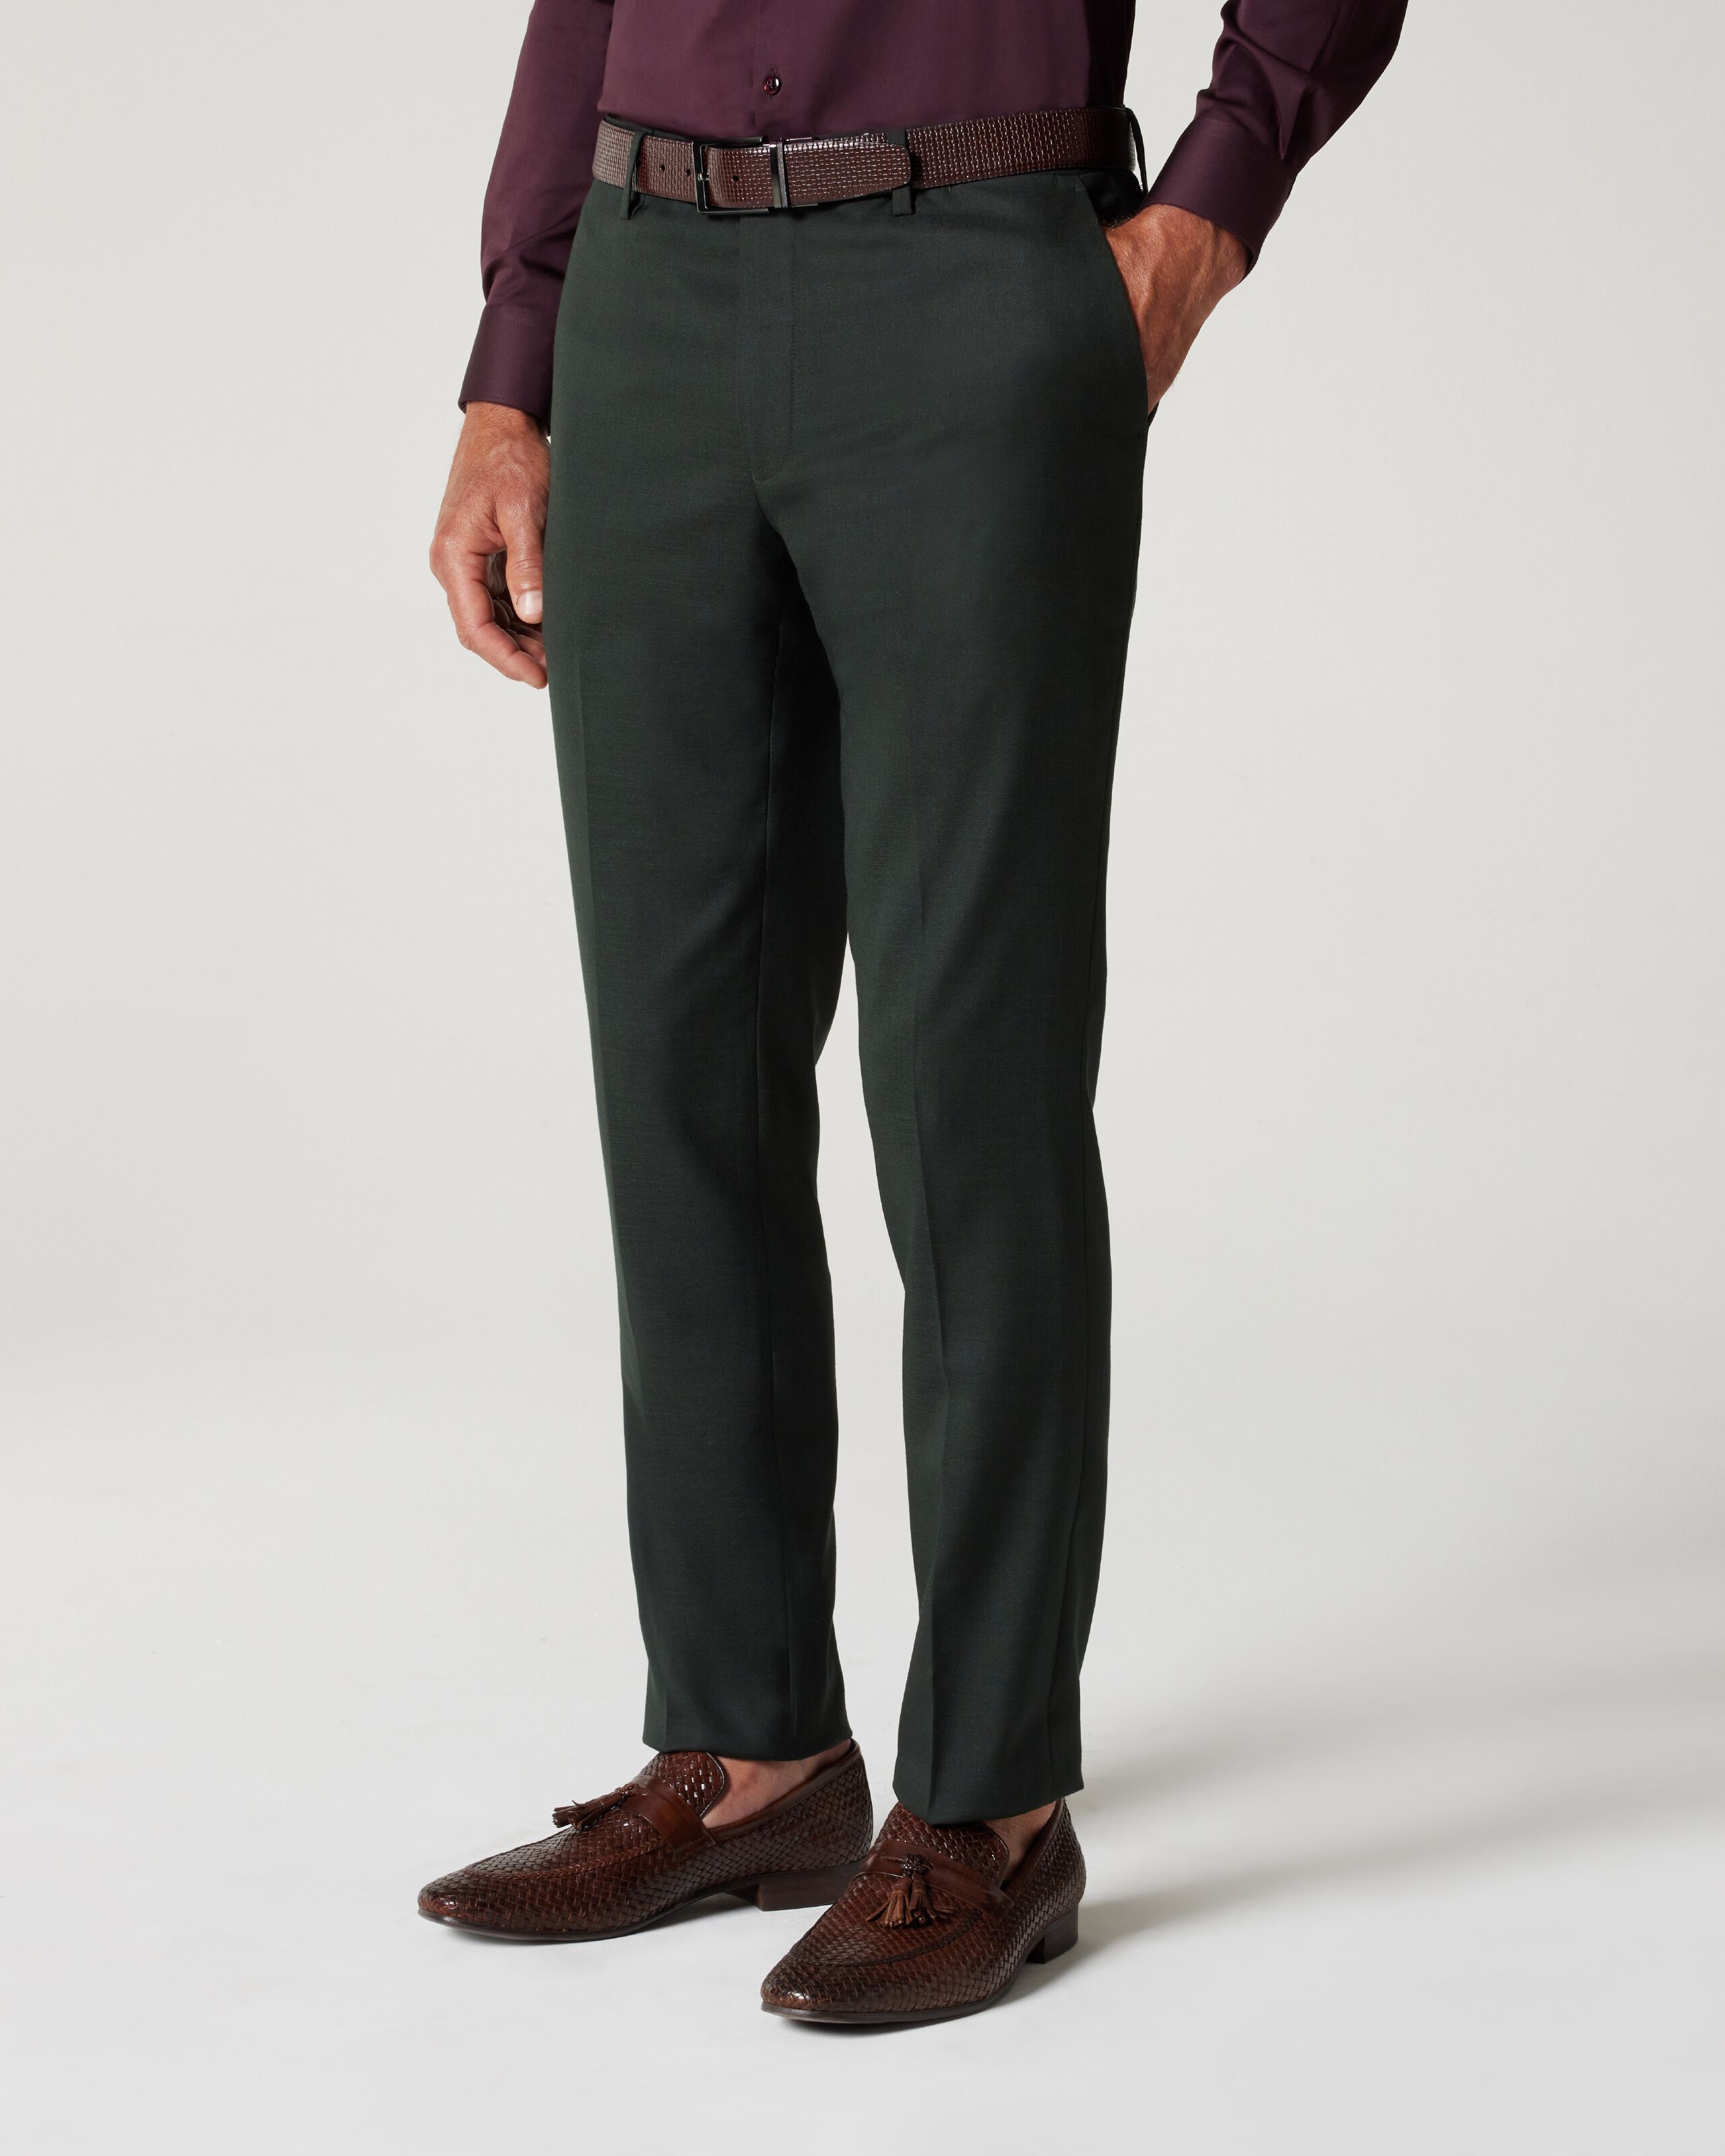 Peter England Casuals Green Regular Fit Trousers